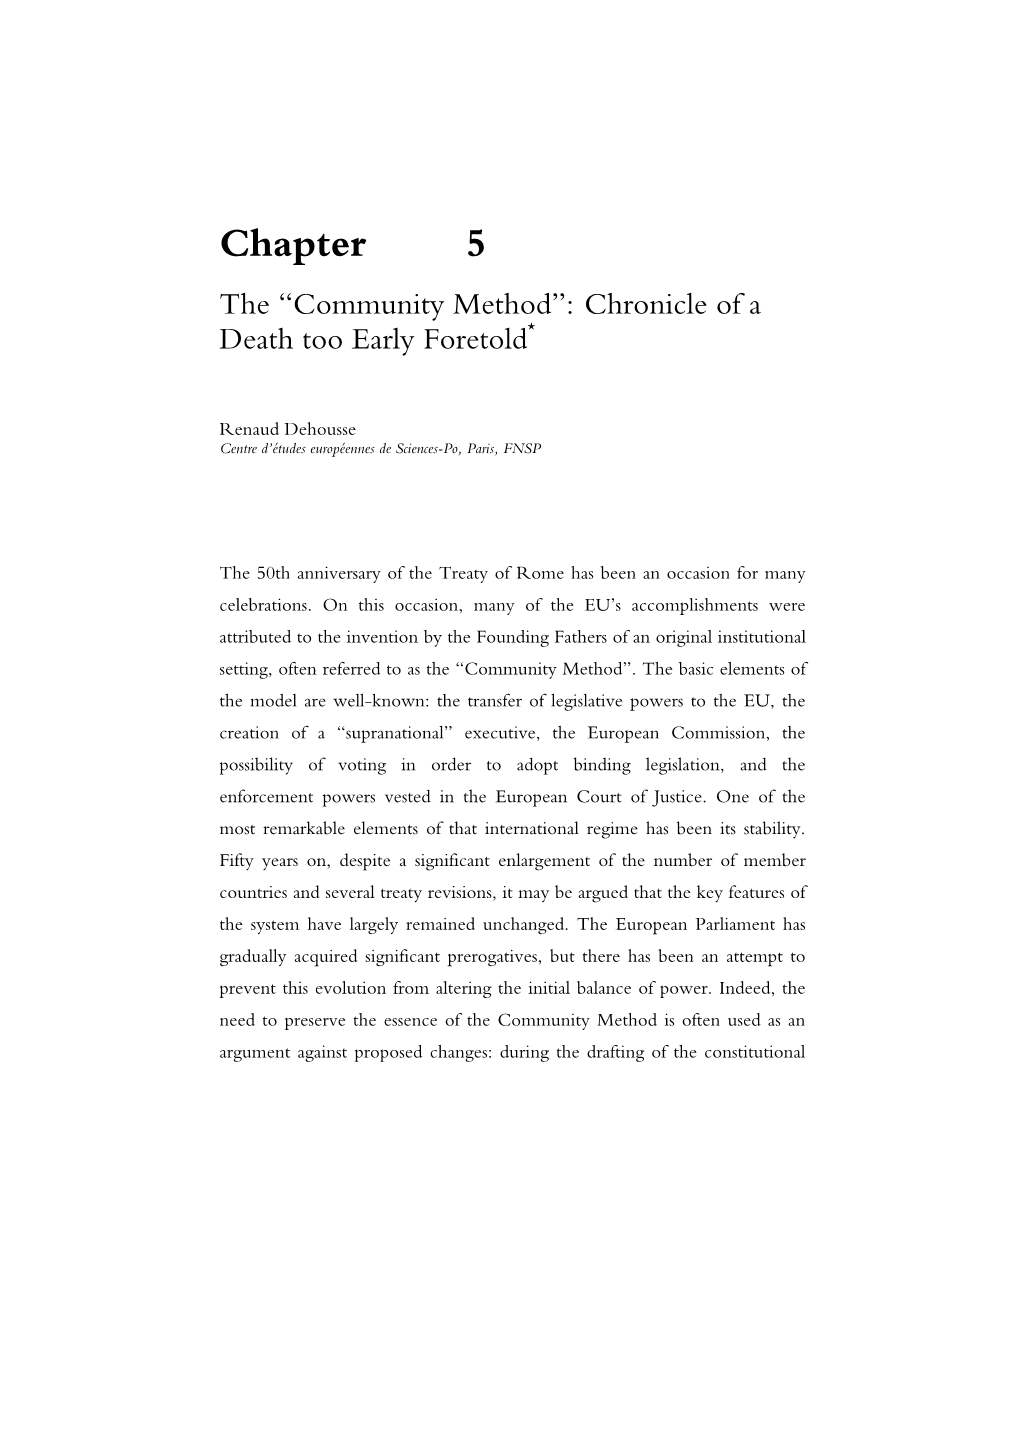 Chapter 5 the “Community Method”: Chronicle of a Death Too Early Foretold*